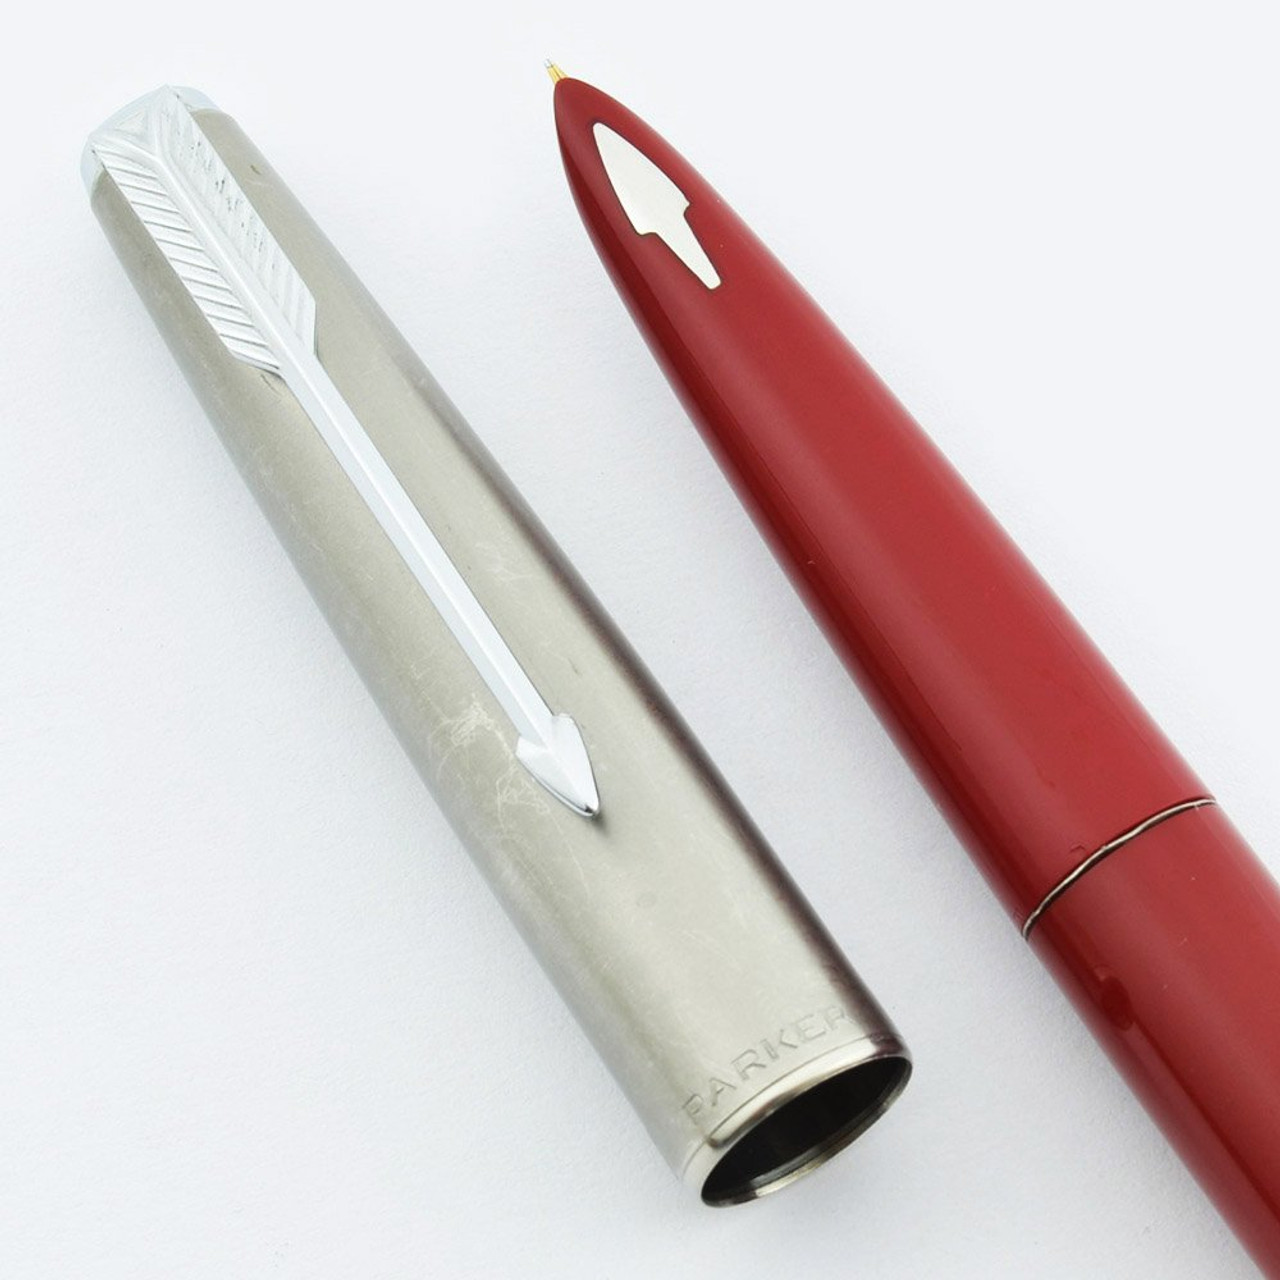 Parker 61 Fountain Pen - Mk I, Red w Steel Cap, Extra Fine Nib (Very Nice, Works Well)